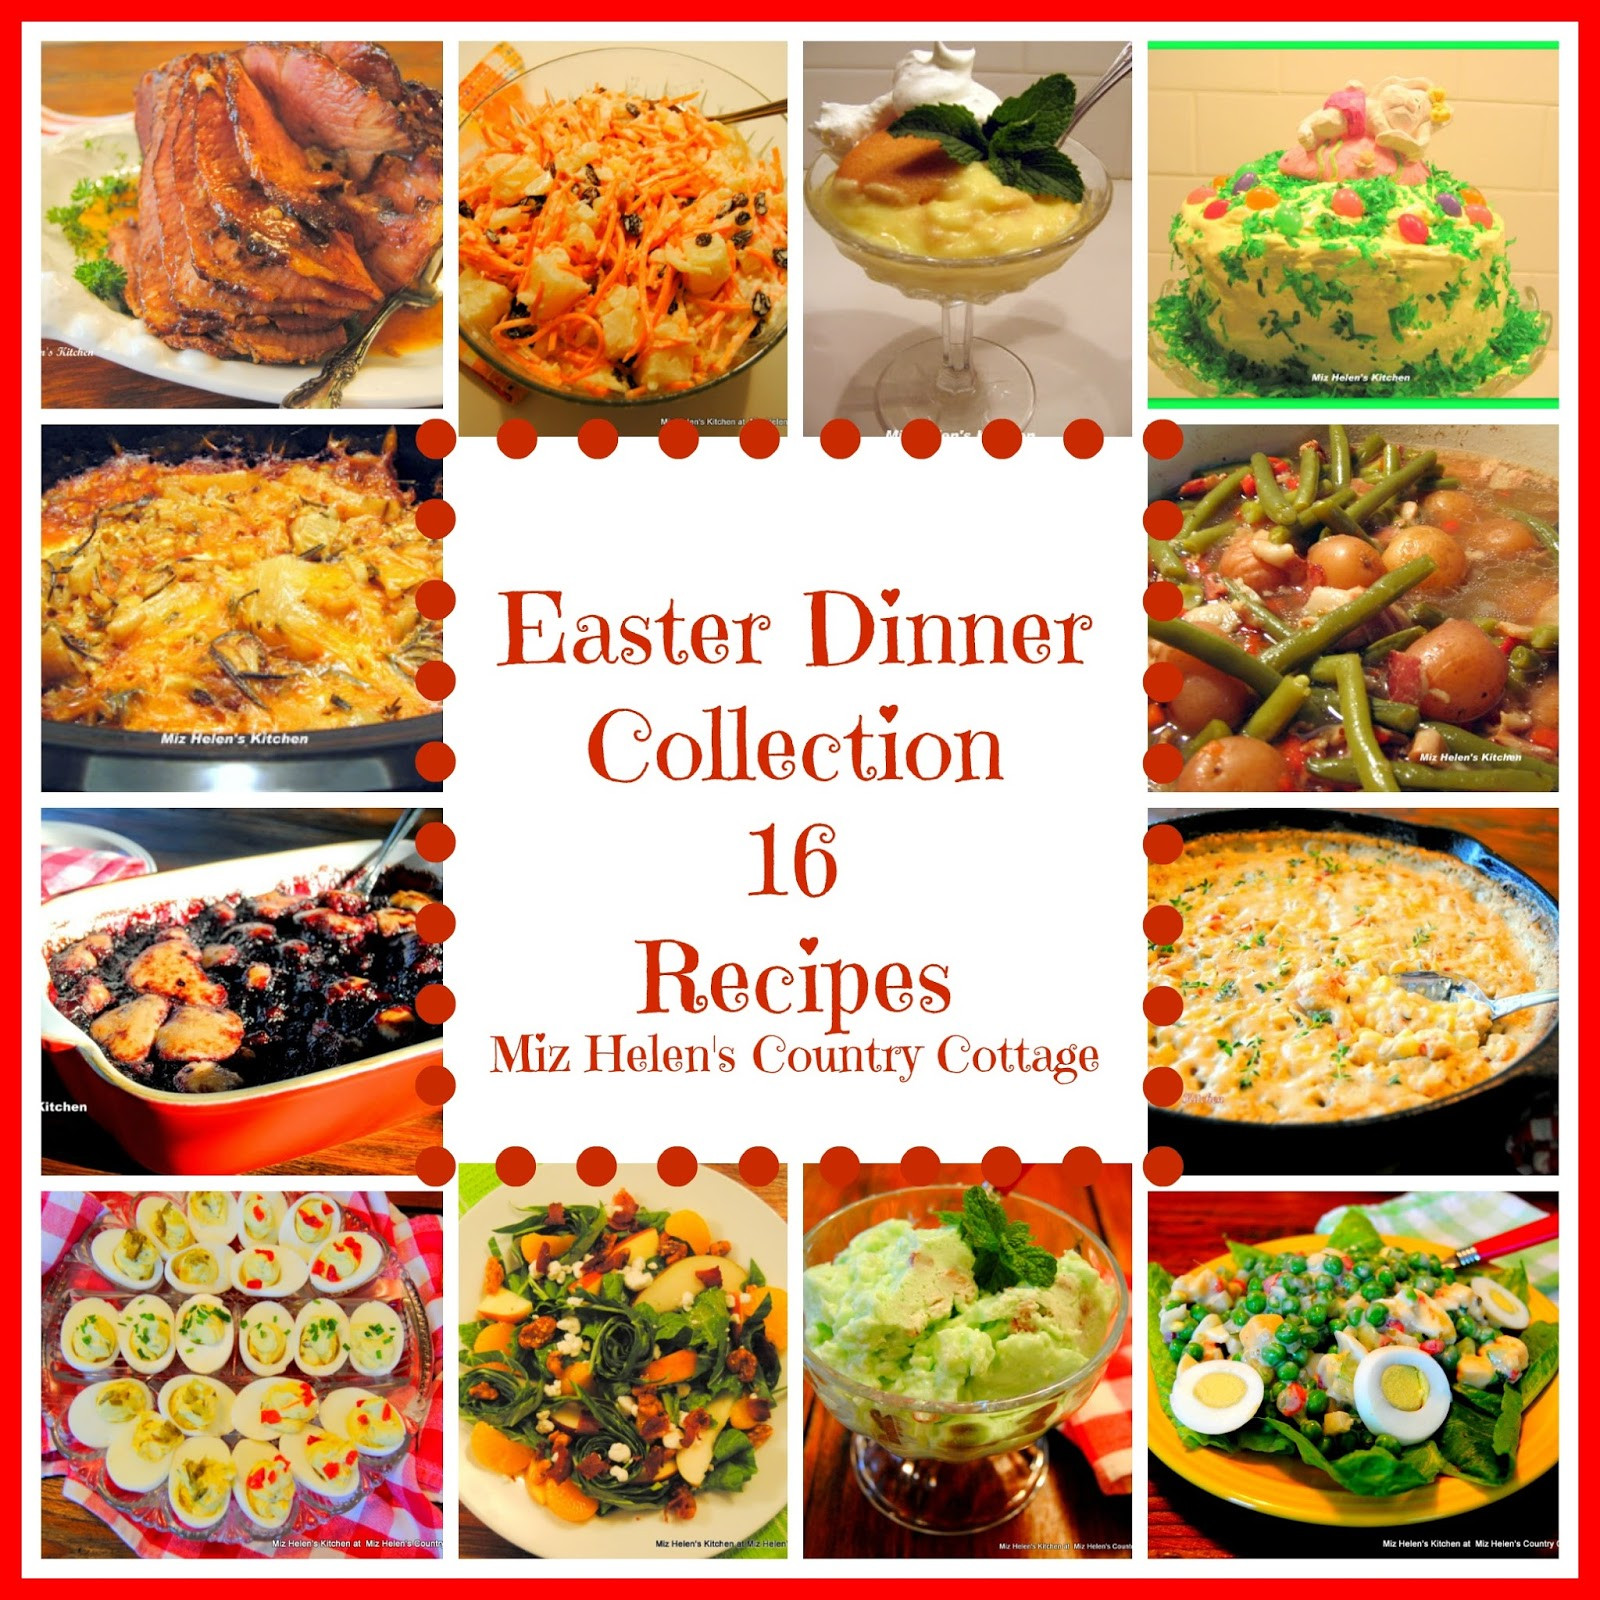 Don’t Miss Our 15 Most Shared Easter Dinner Recipe